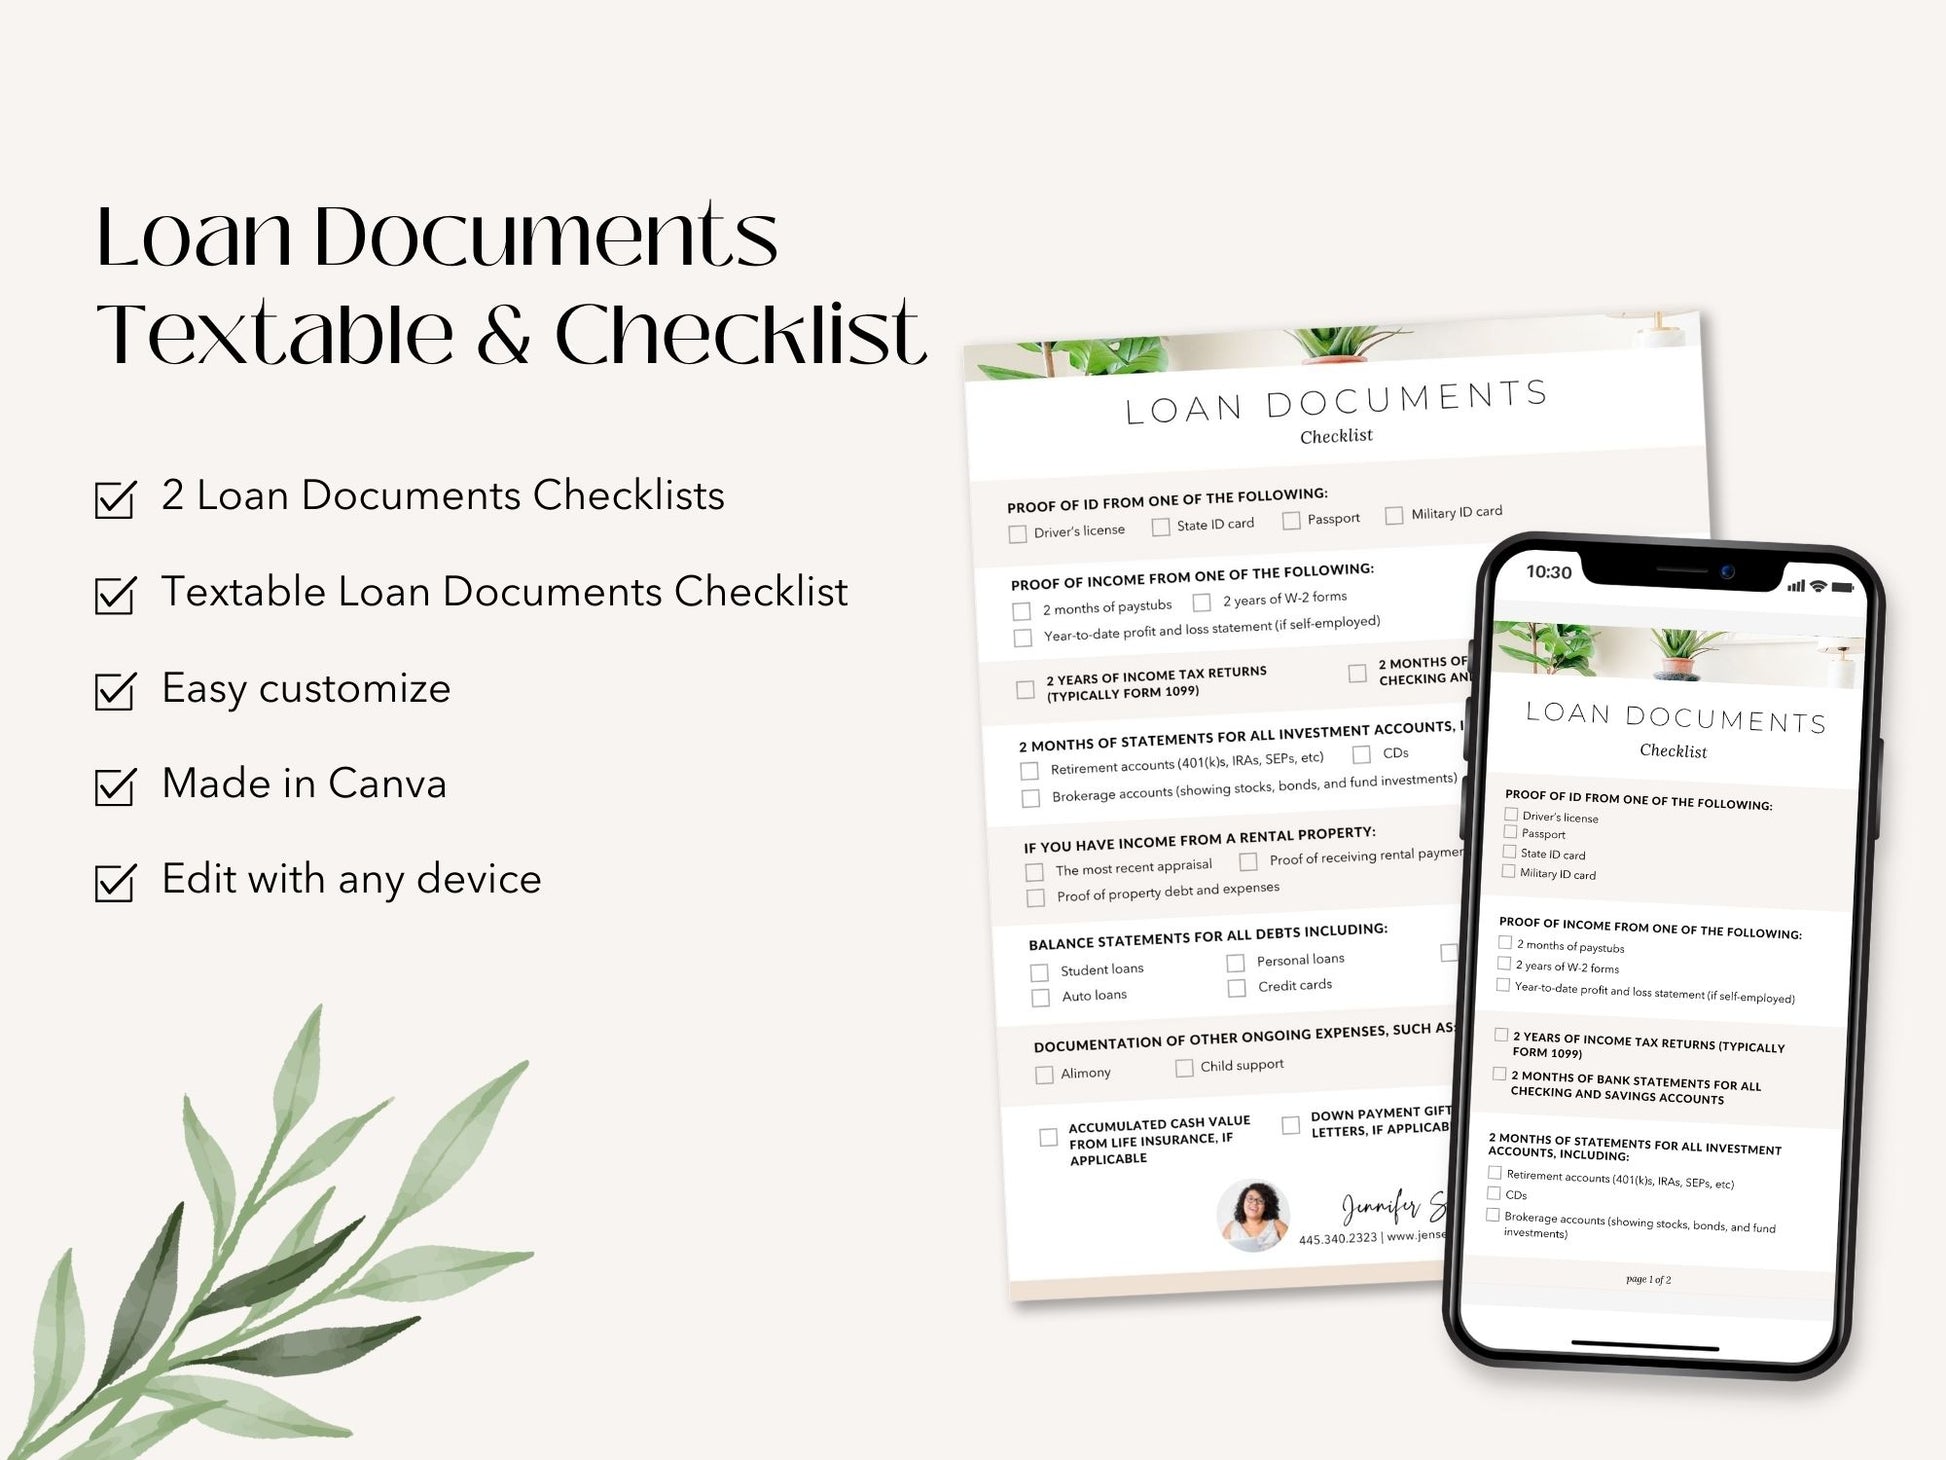 Loan Documents Checklist Textable and Flyer Bundle - Streamline the loan process with a comprehensive Loan Documents Checklist and a convenient Textable Loan Documents Checklist for a smooth loan application journey.